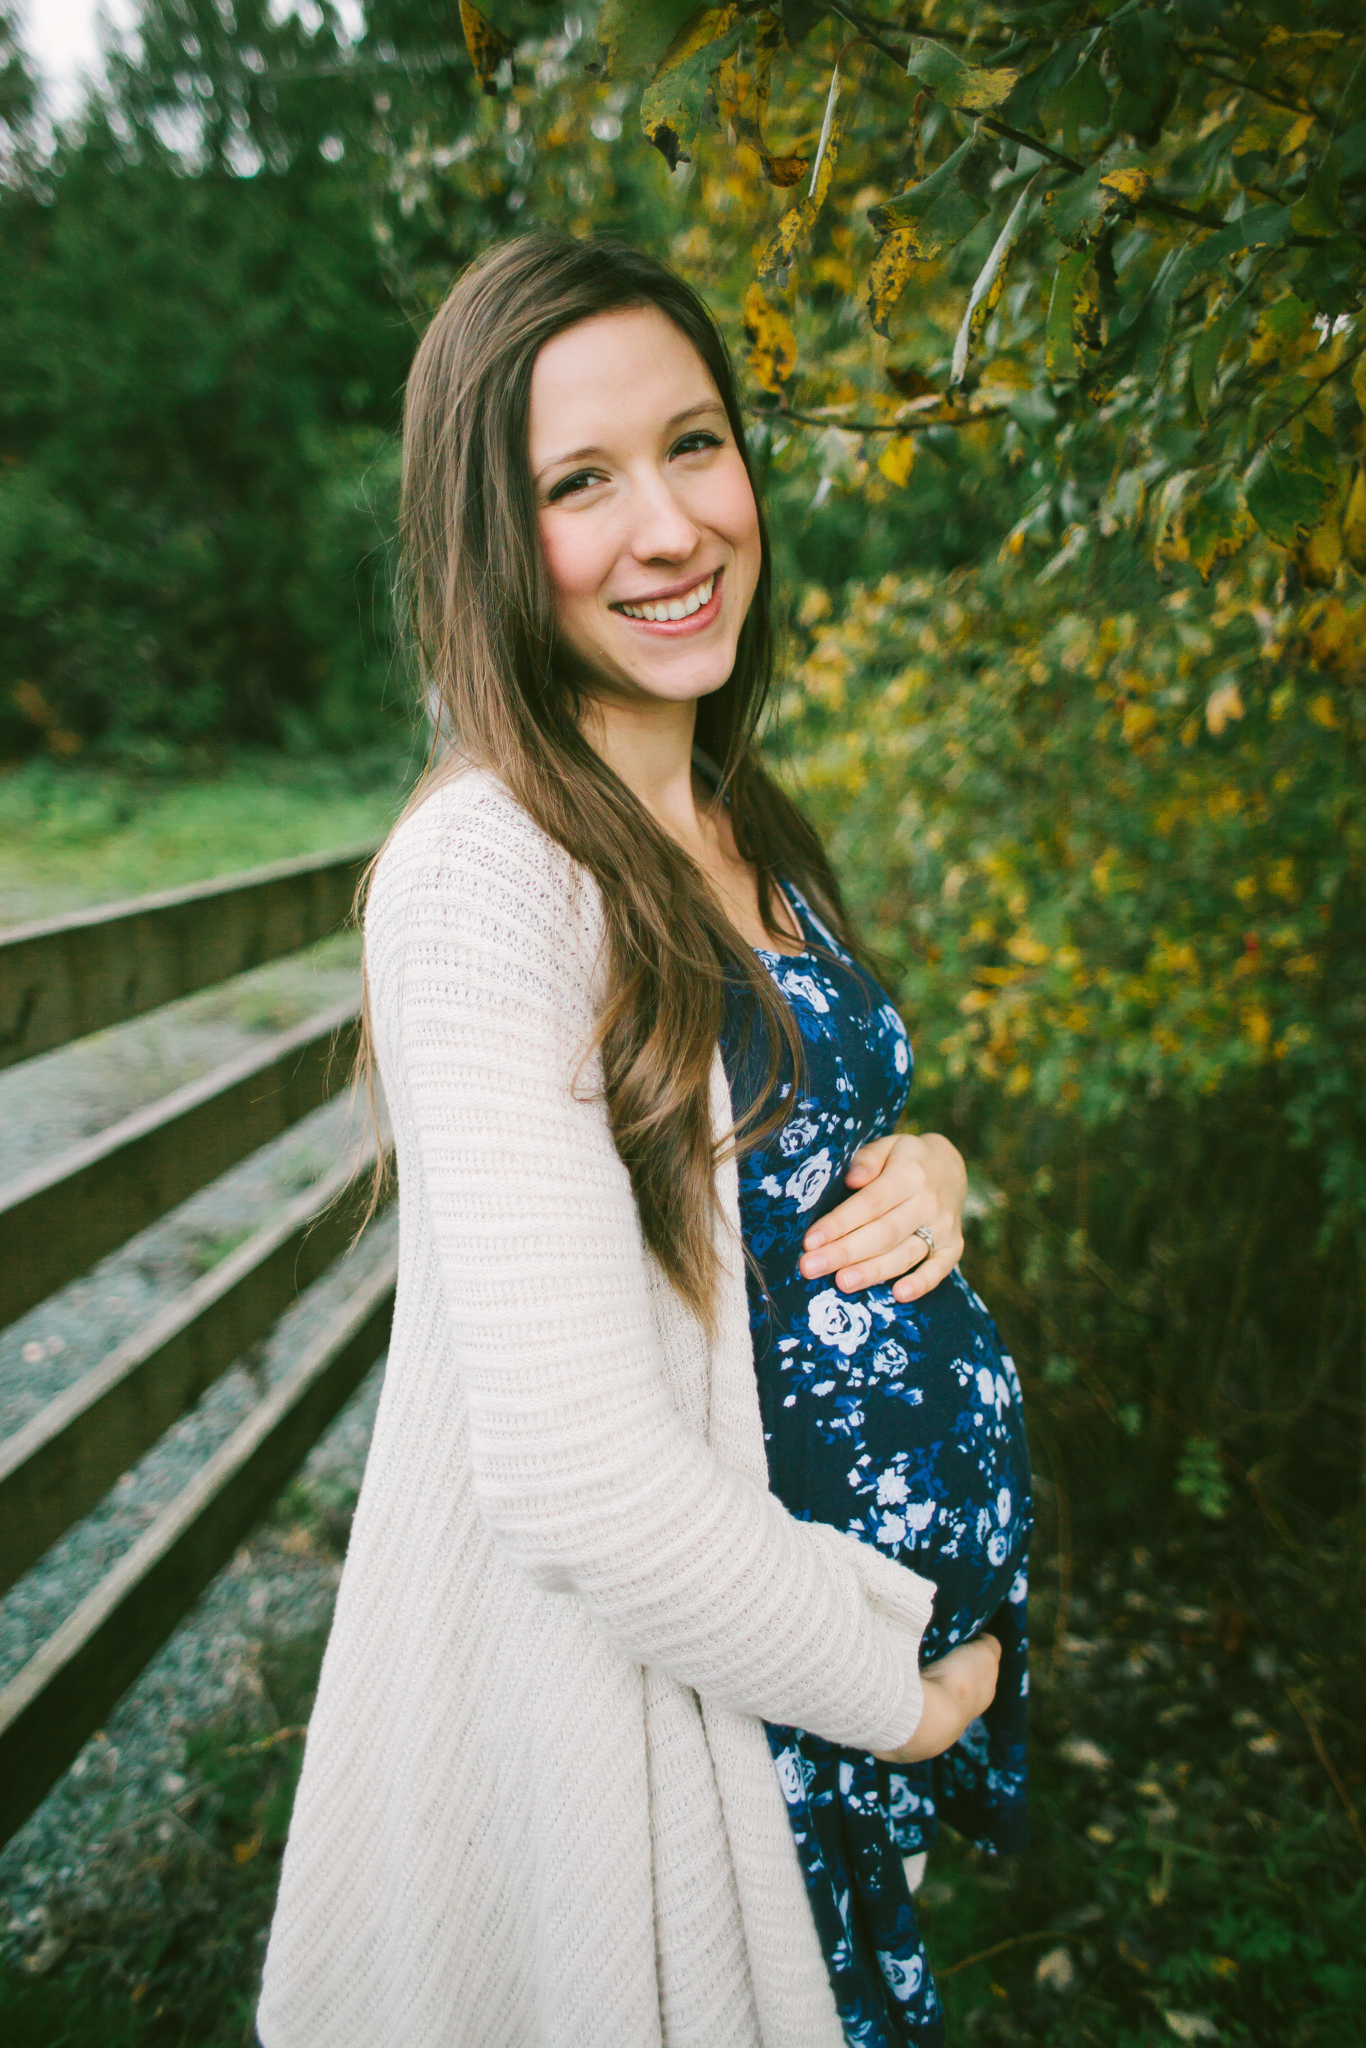 View More: http://michellekarstphotography.pass.us/raganmaternity2015